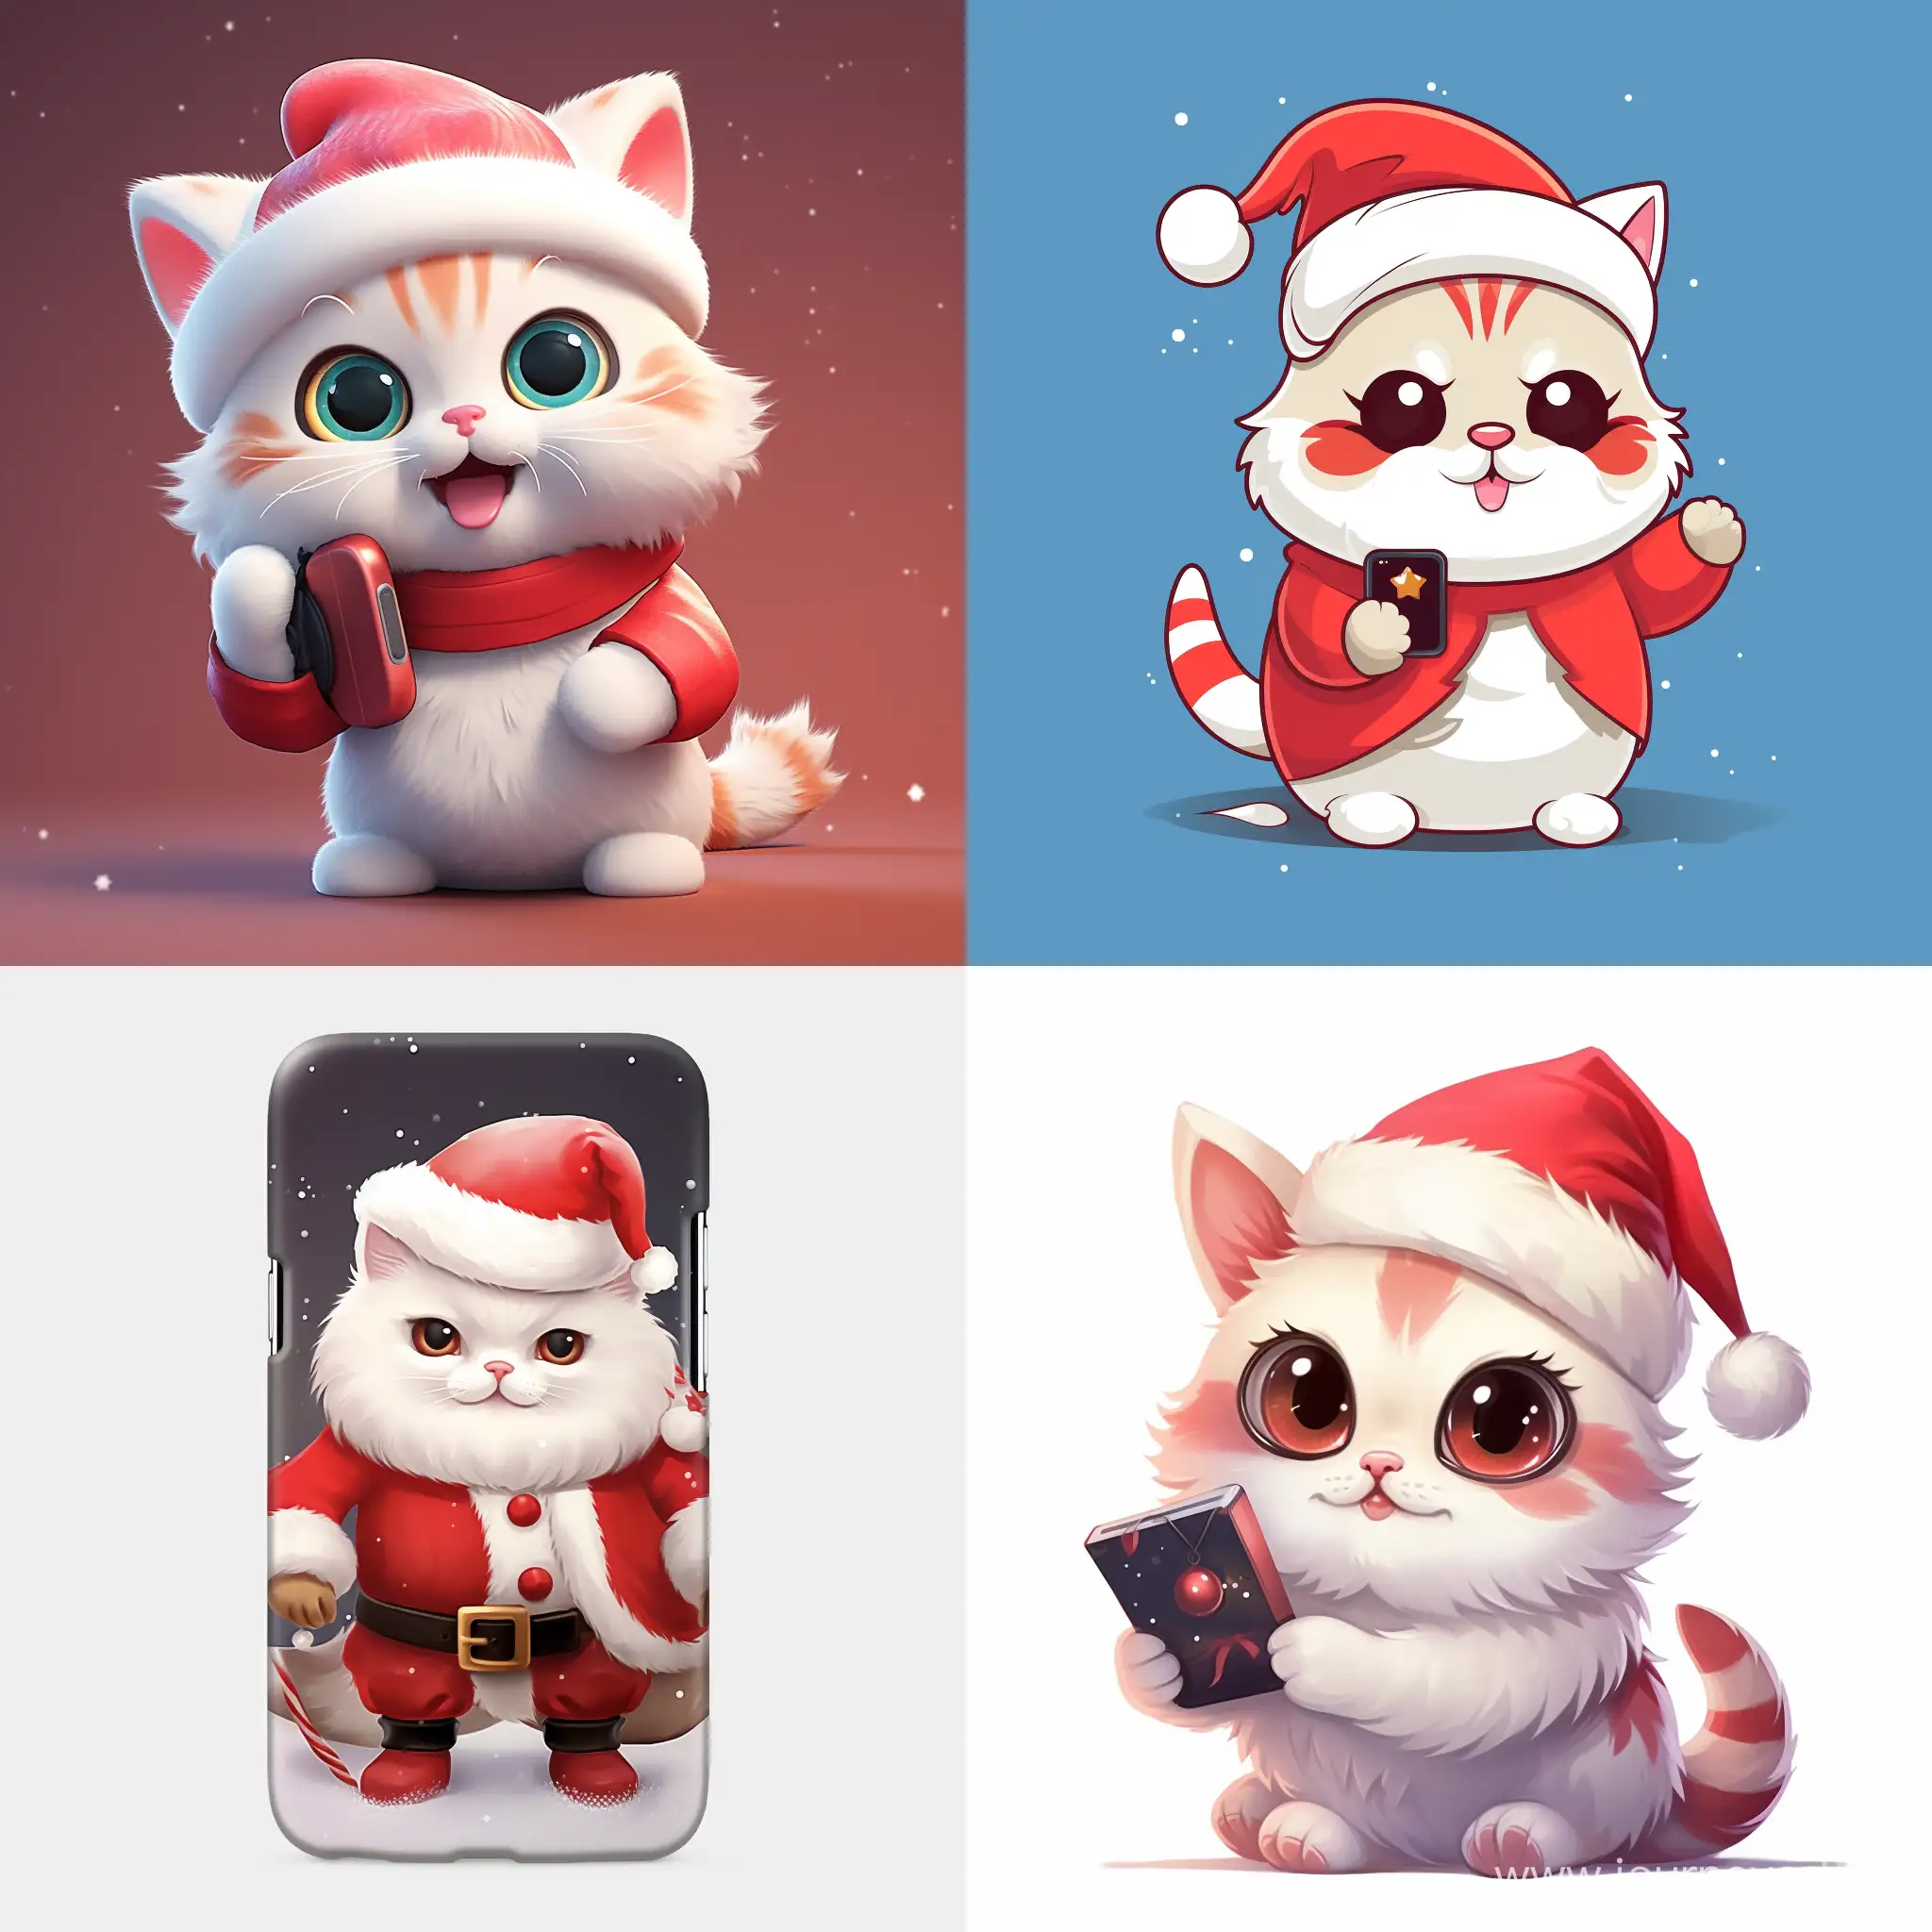 Adorable-Santa-Cat-Poses-with-Mobile-Phone